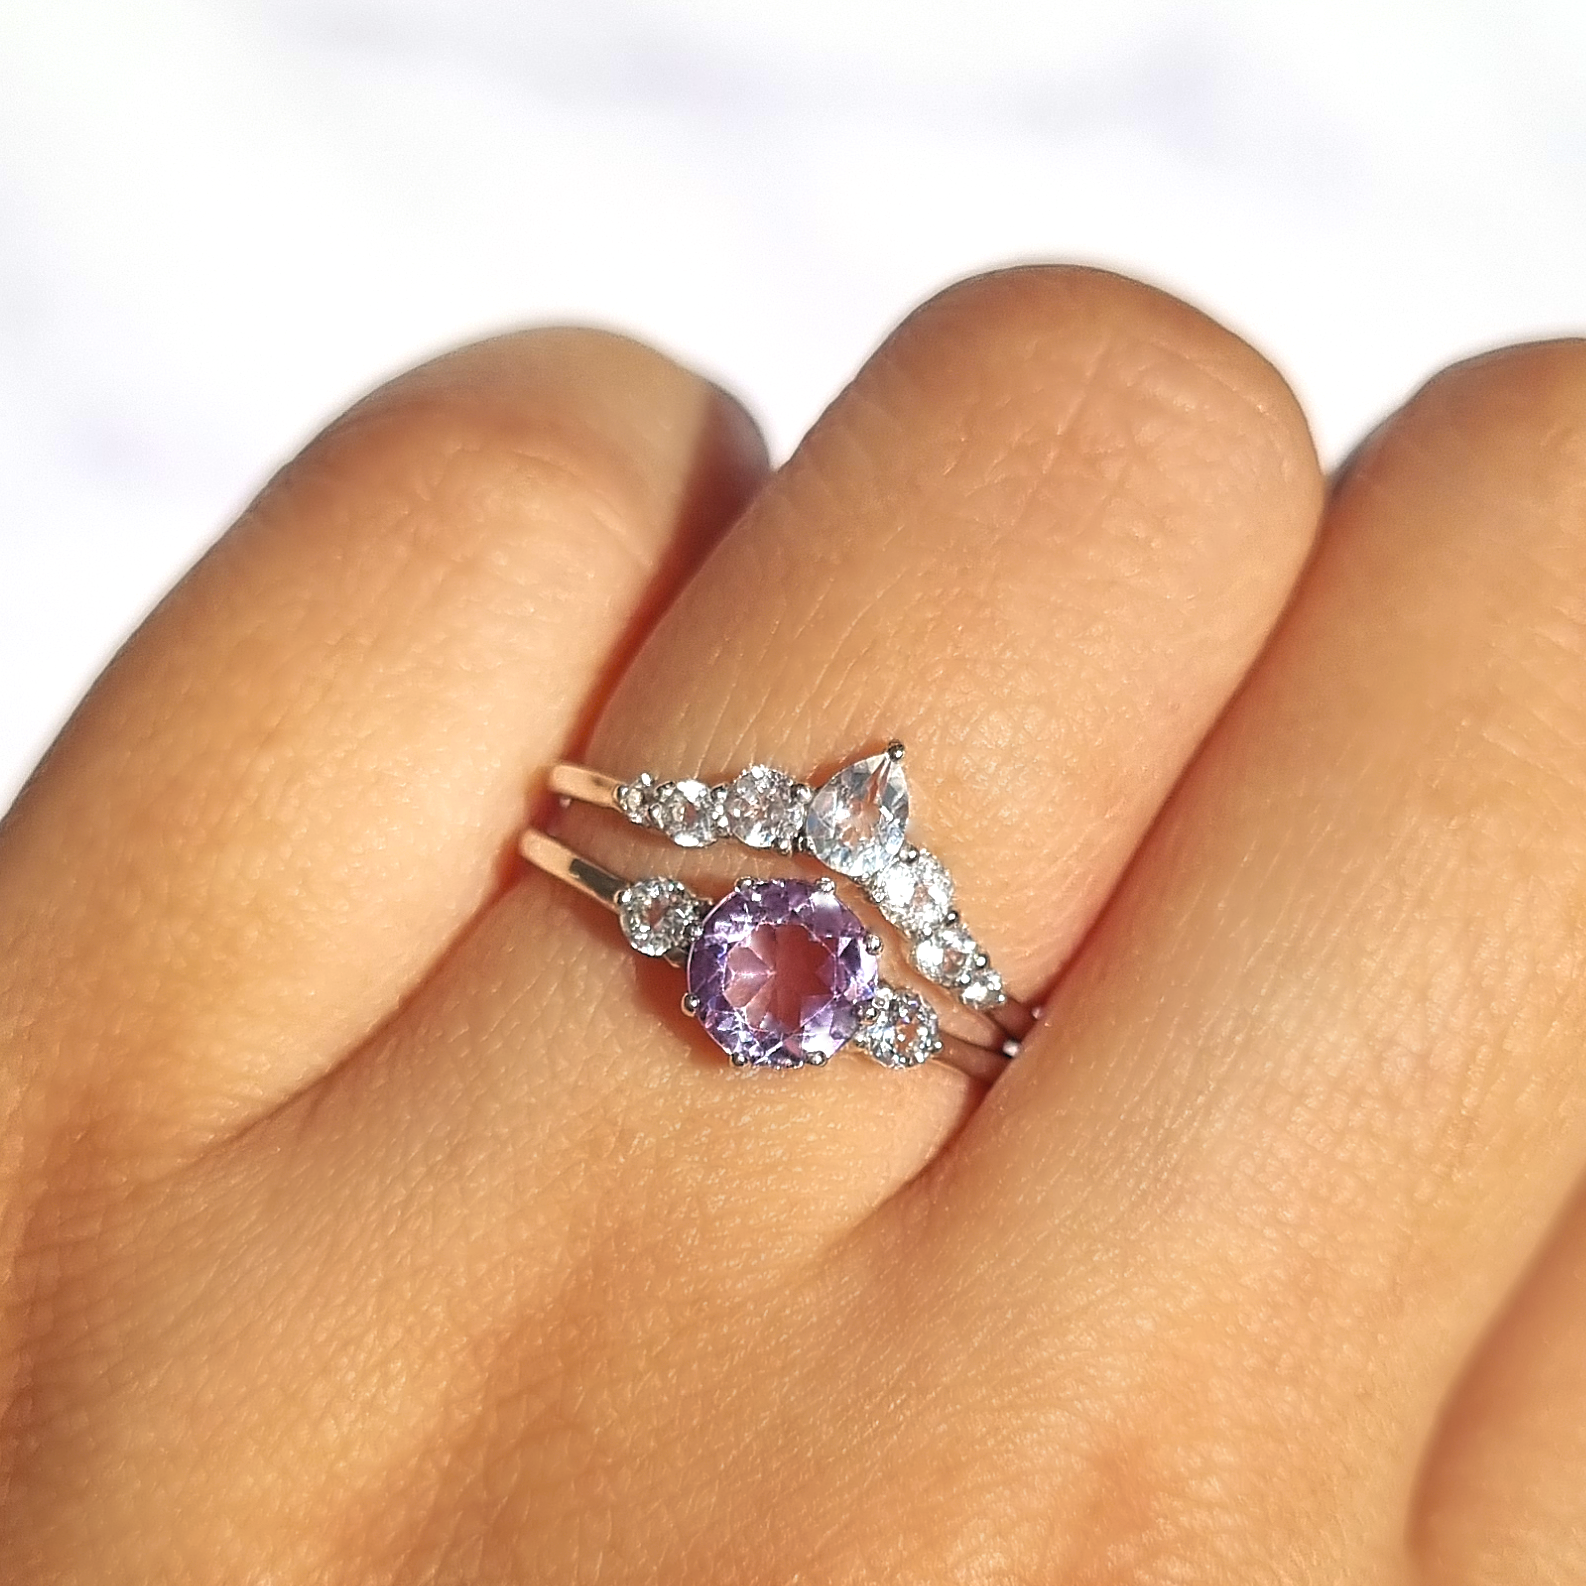 Lavender Amethyst Ring Sterling Silver Ring Set, Engagement & Promise Ring Stack, Classic Setting Gemstone Statement Ring, Anniversary, Birthday Gift For Her, Mum, Girlfriend, Wife, Fiance Christmas Gift, Purple gem, Dainty, Victorian, round Cut Ring